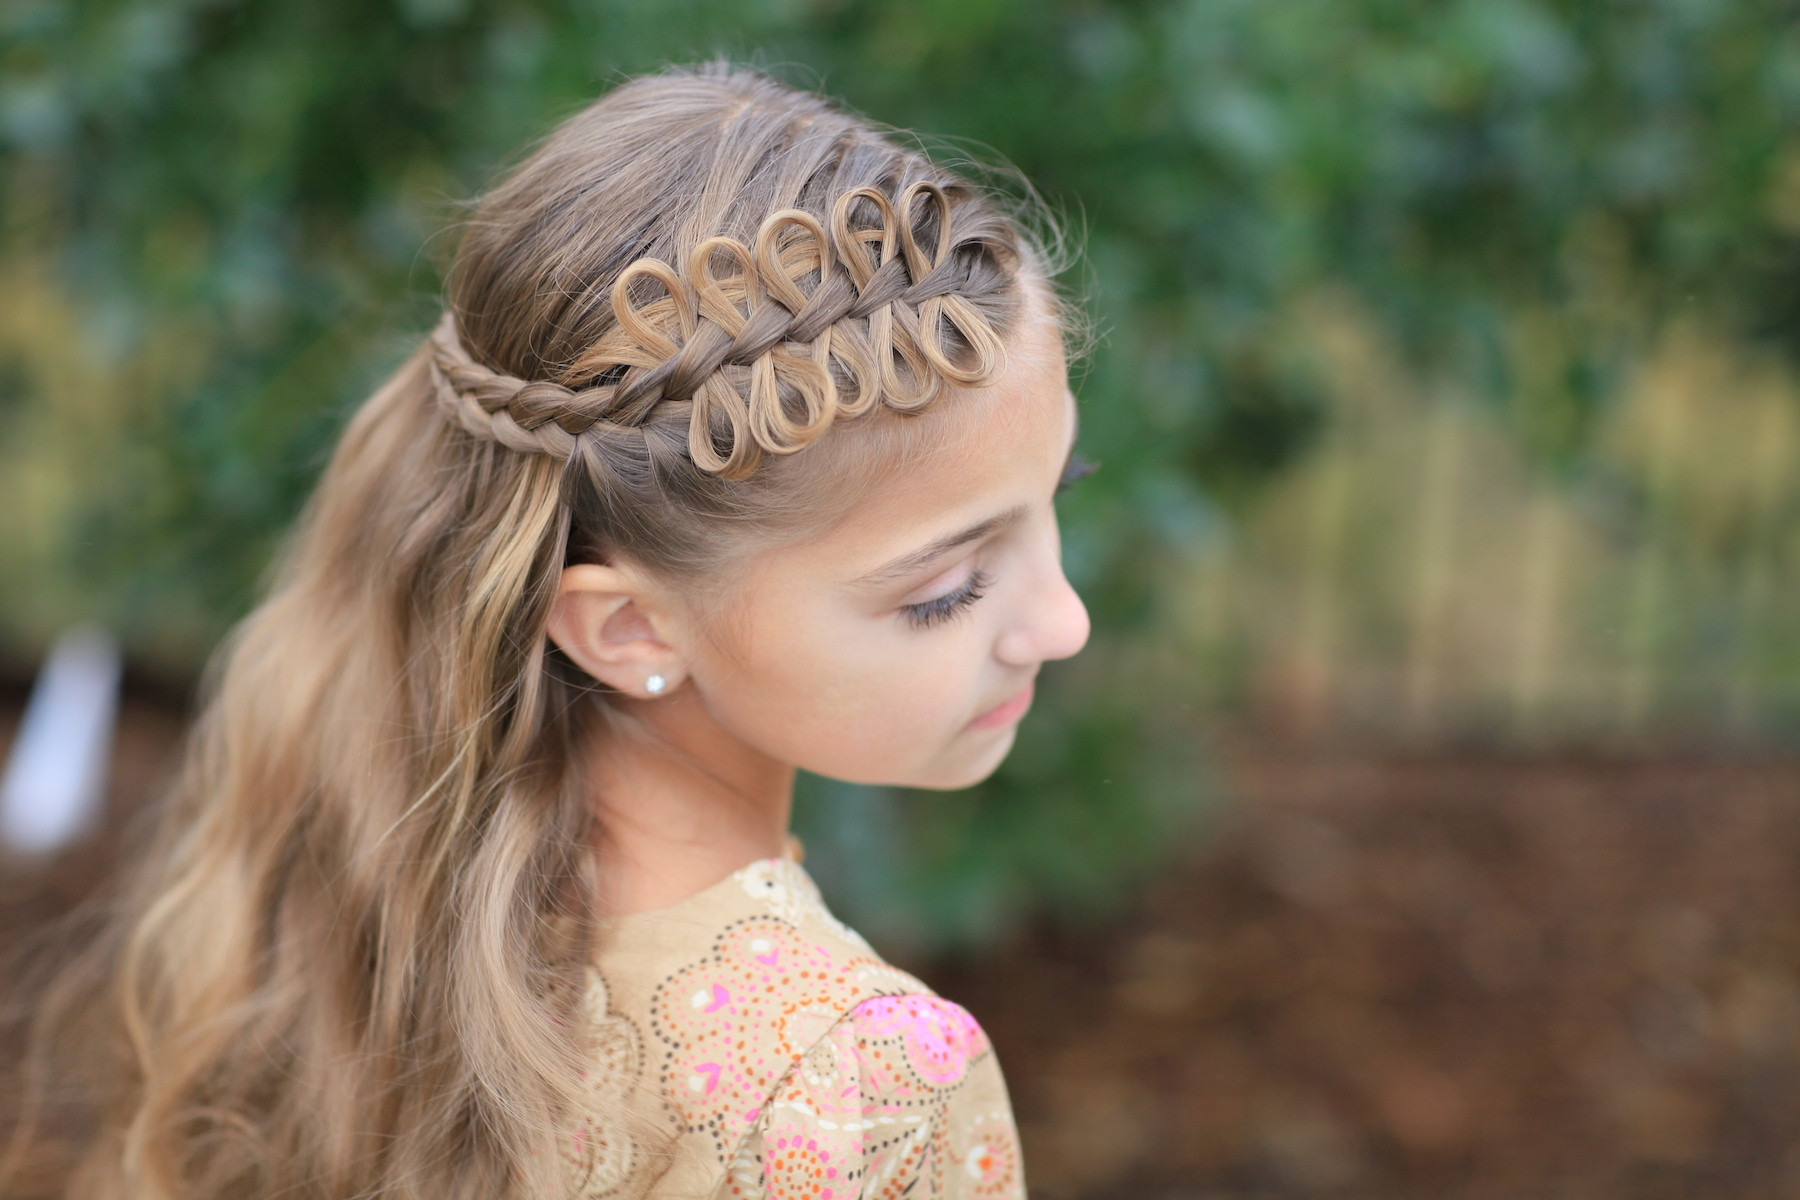 Cute Little Girl Hairstyles Pictures
 25 Little Girl Hairstyles you can do YOURSELF